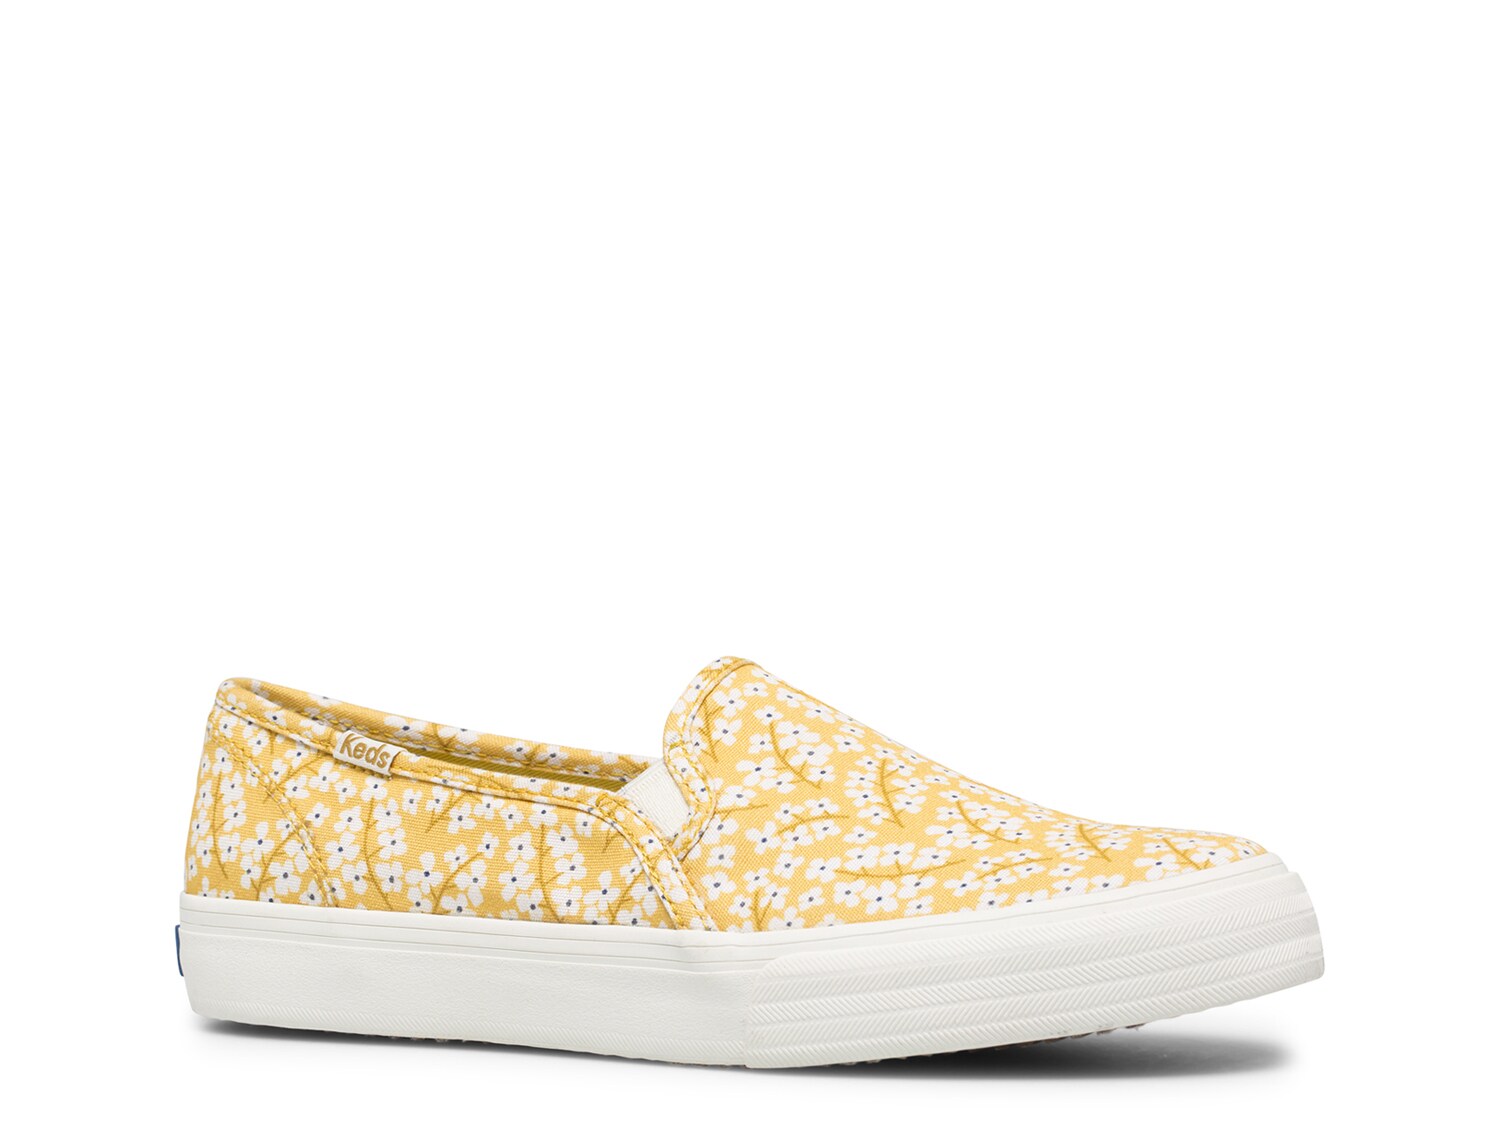 yellow slip on shoes